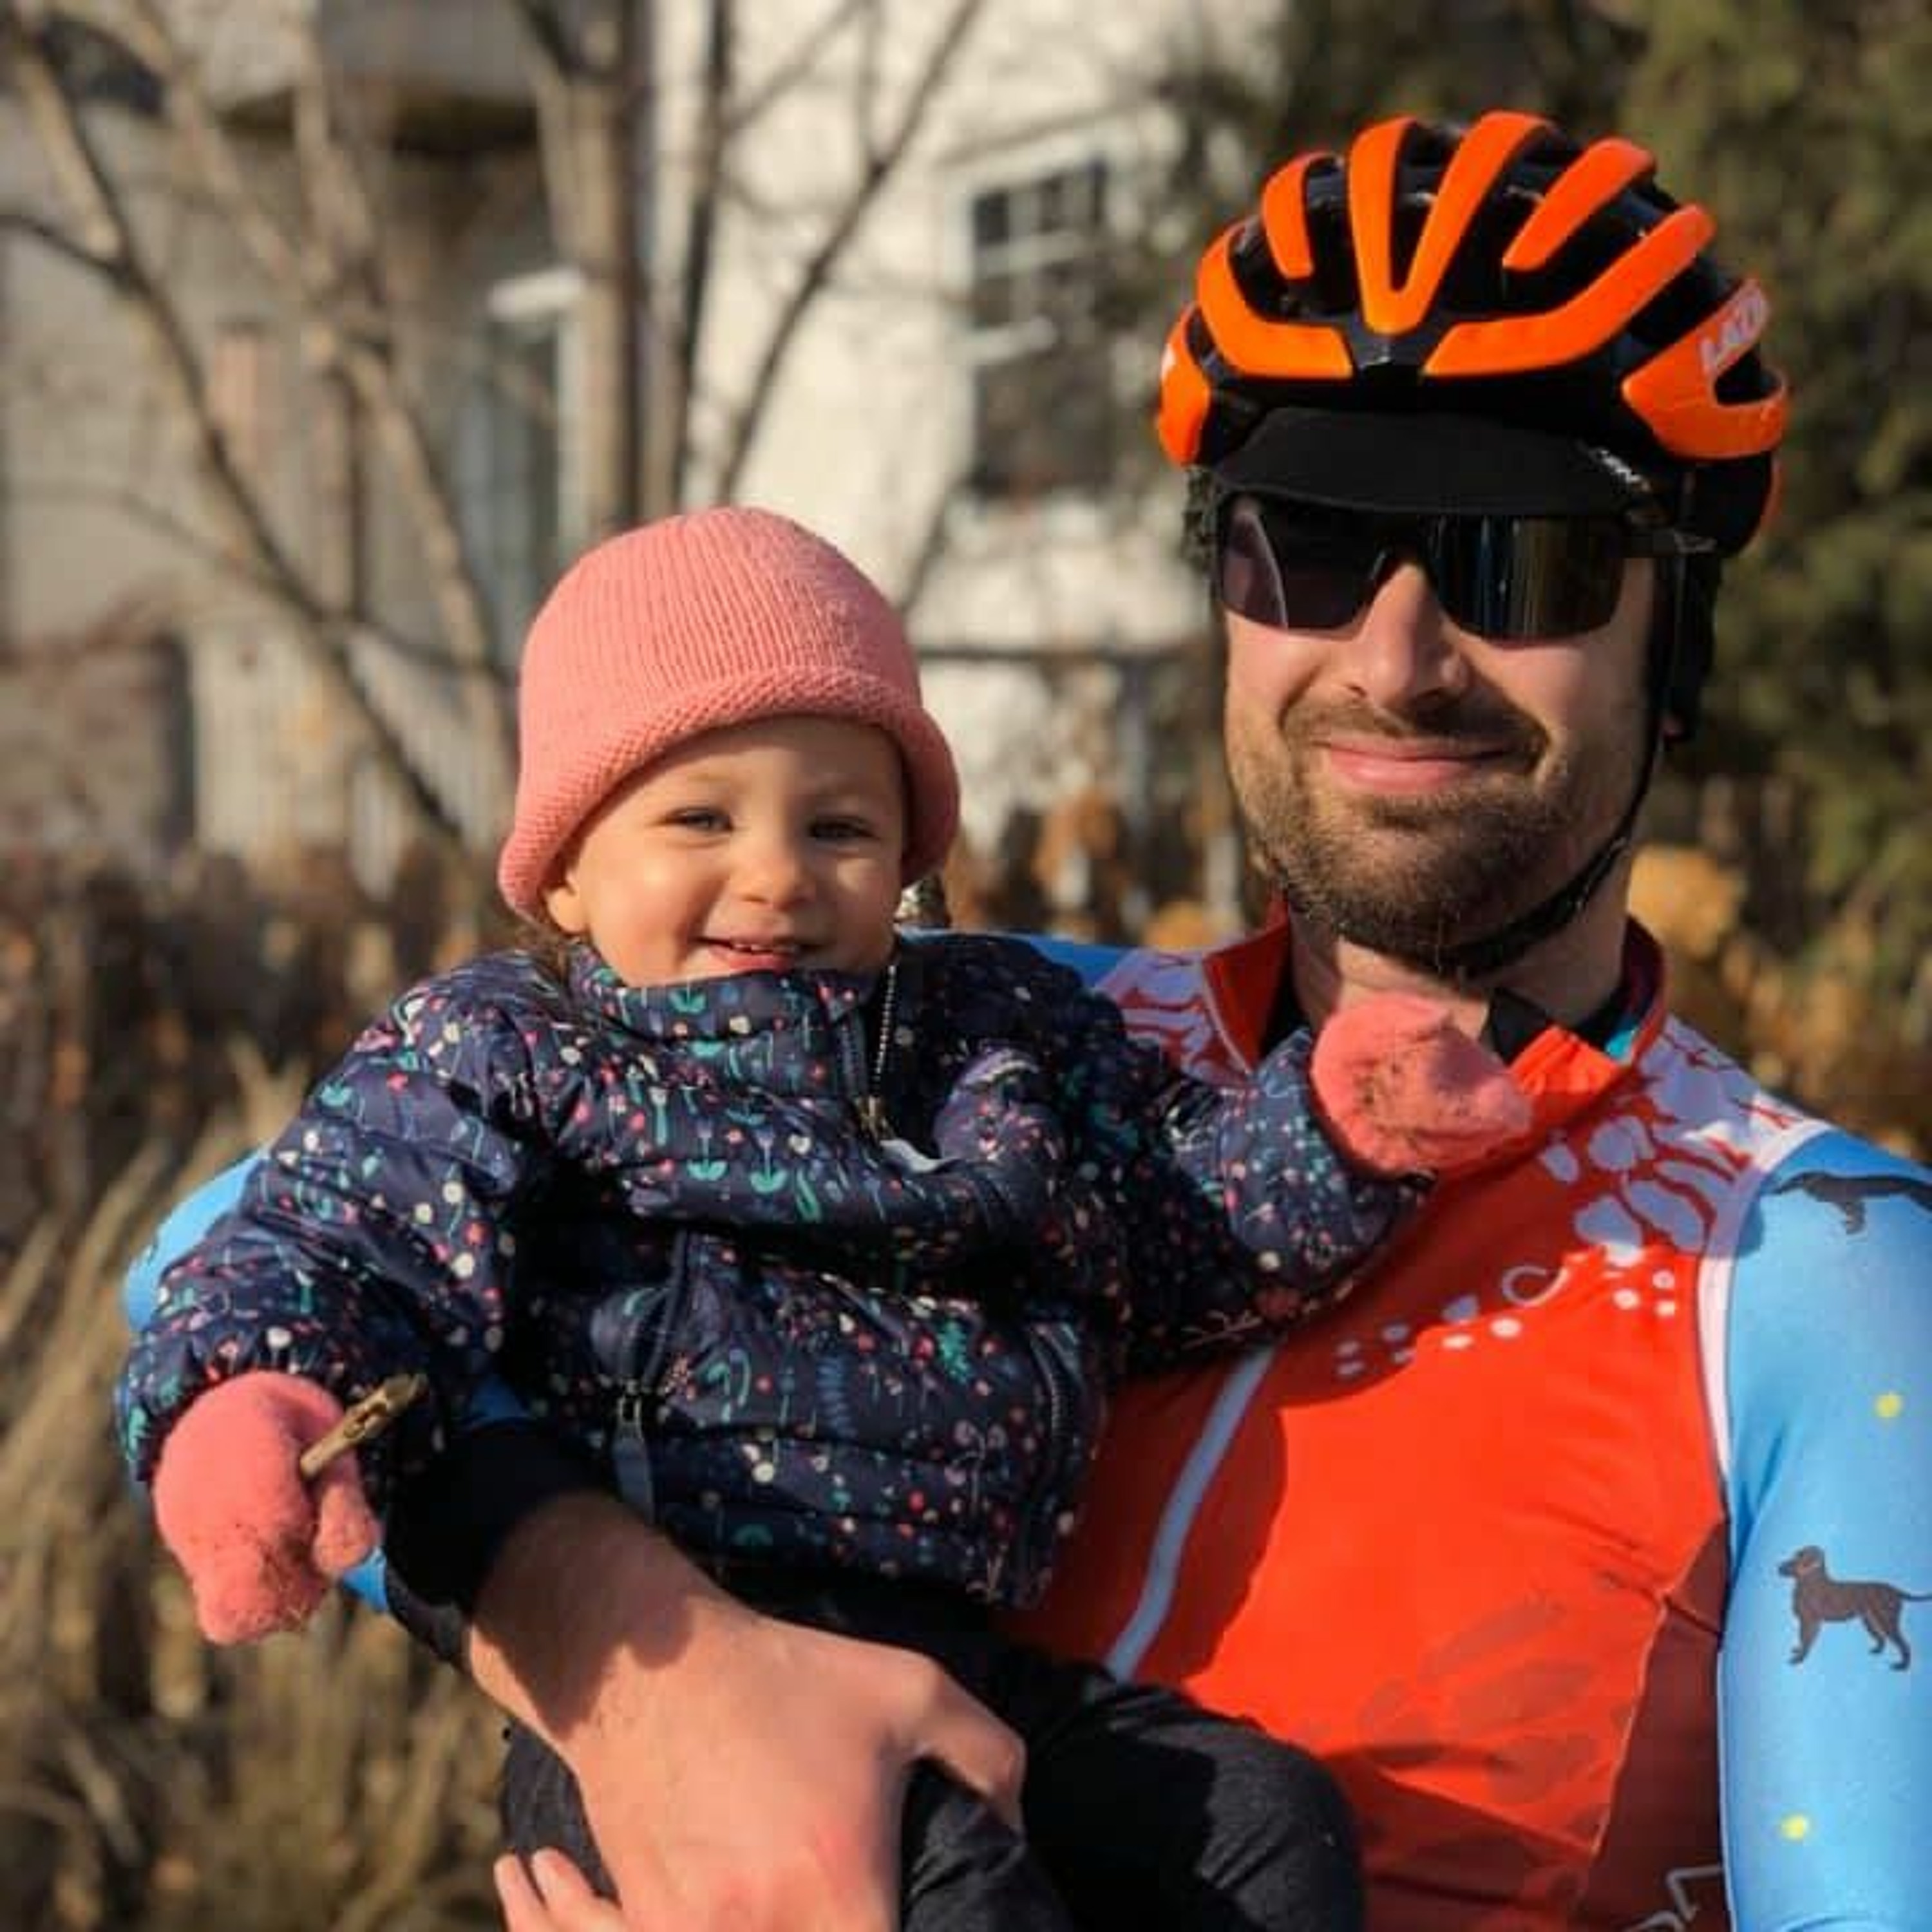 Cycling Dads Podcast - Blast Beats N Bicycles Bike Show 062 - February 27, 2021